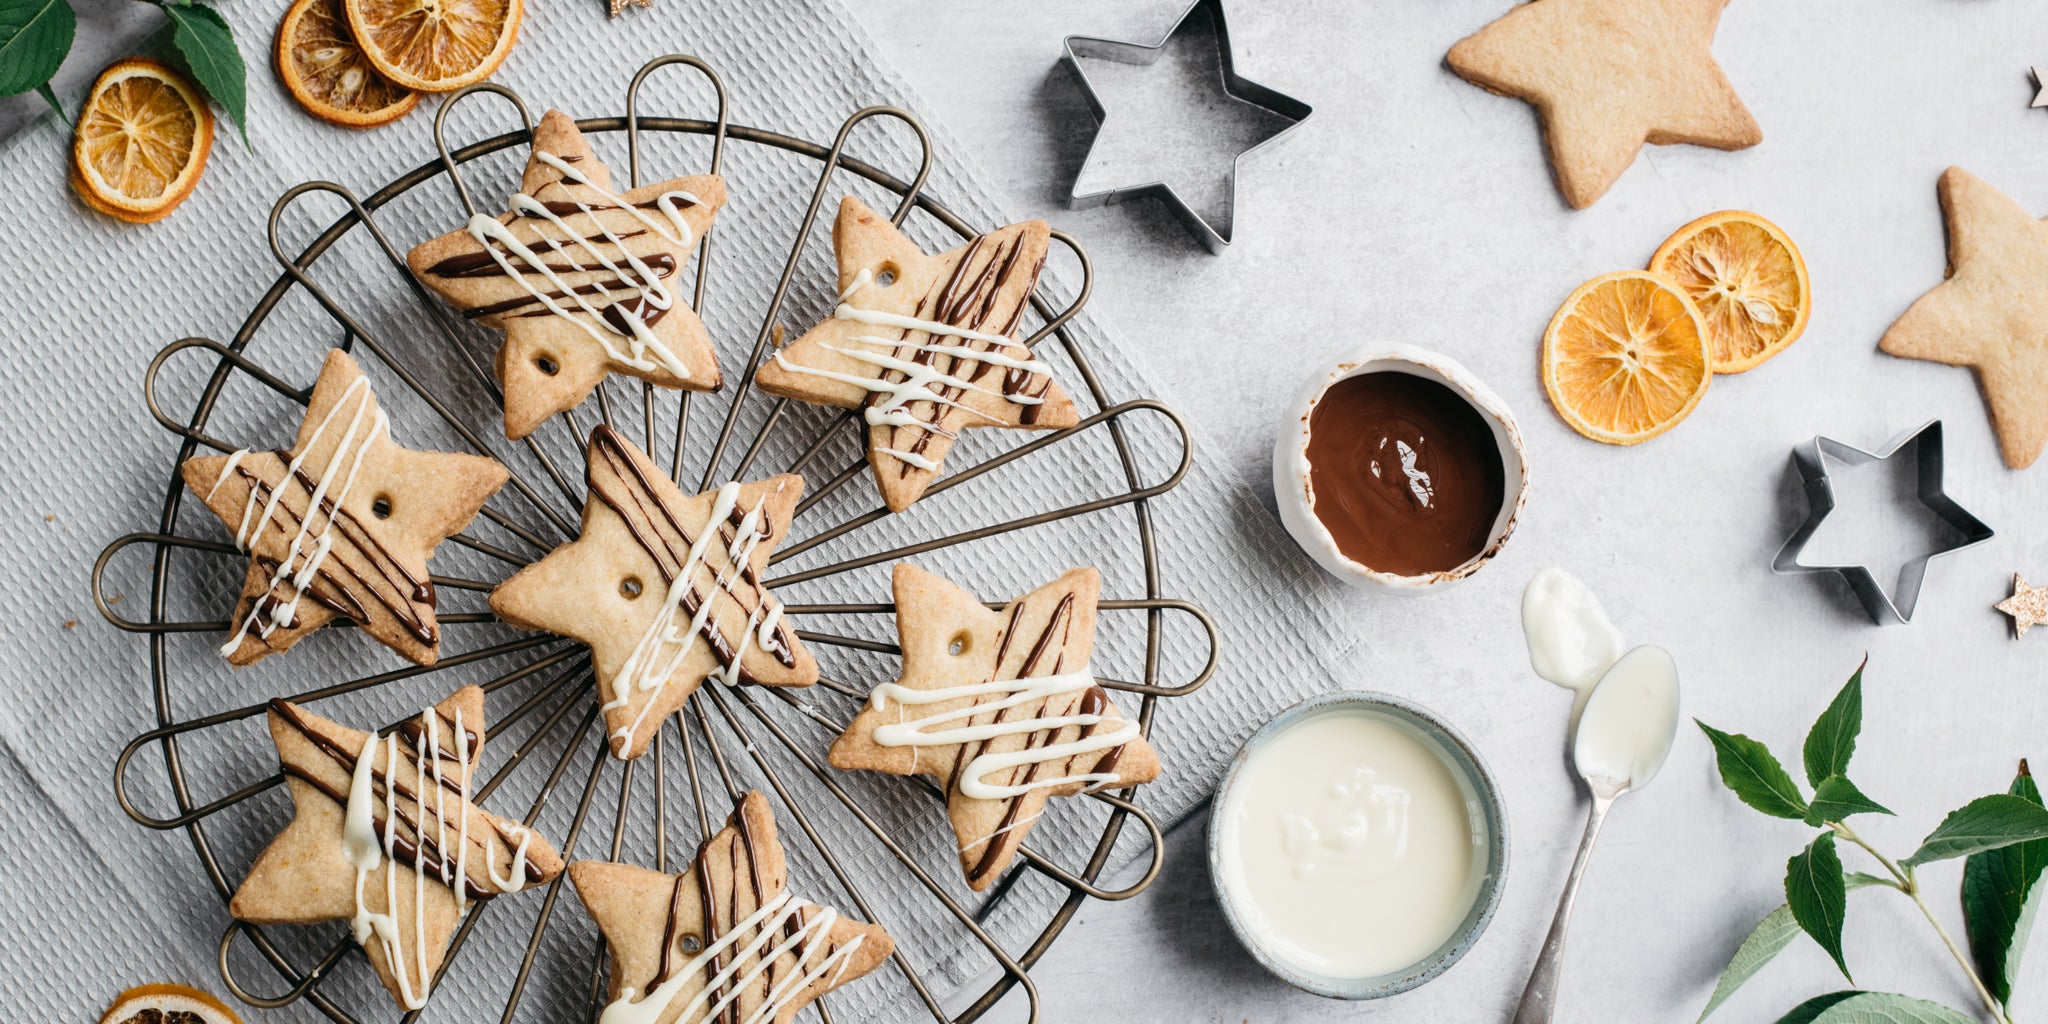 Top view of Orange & Ginger shortbread stars on a wire rack, next to a bowl of melted chocolate, sliced orange and cookie cutters.